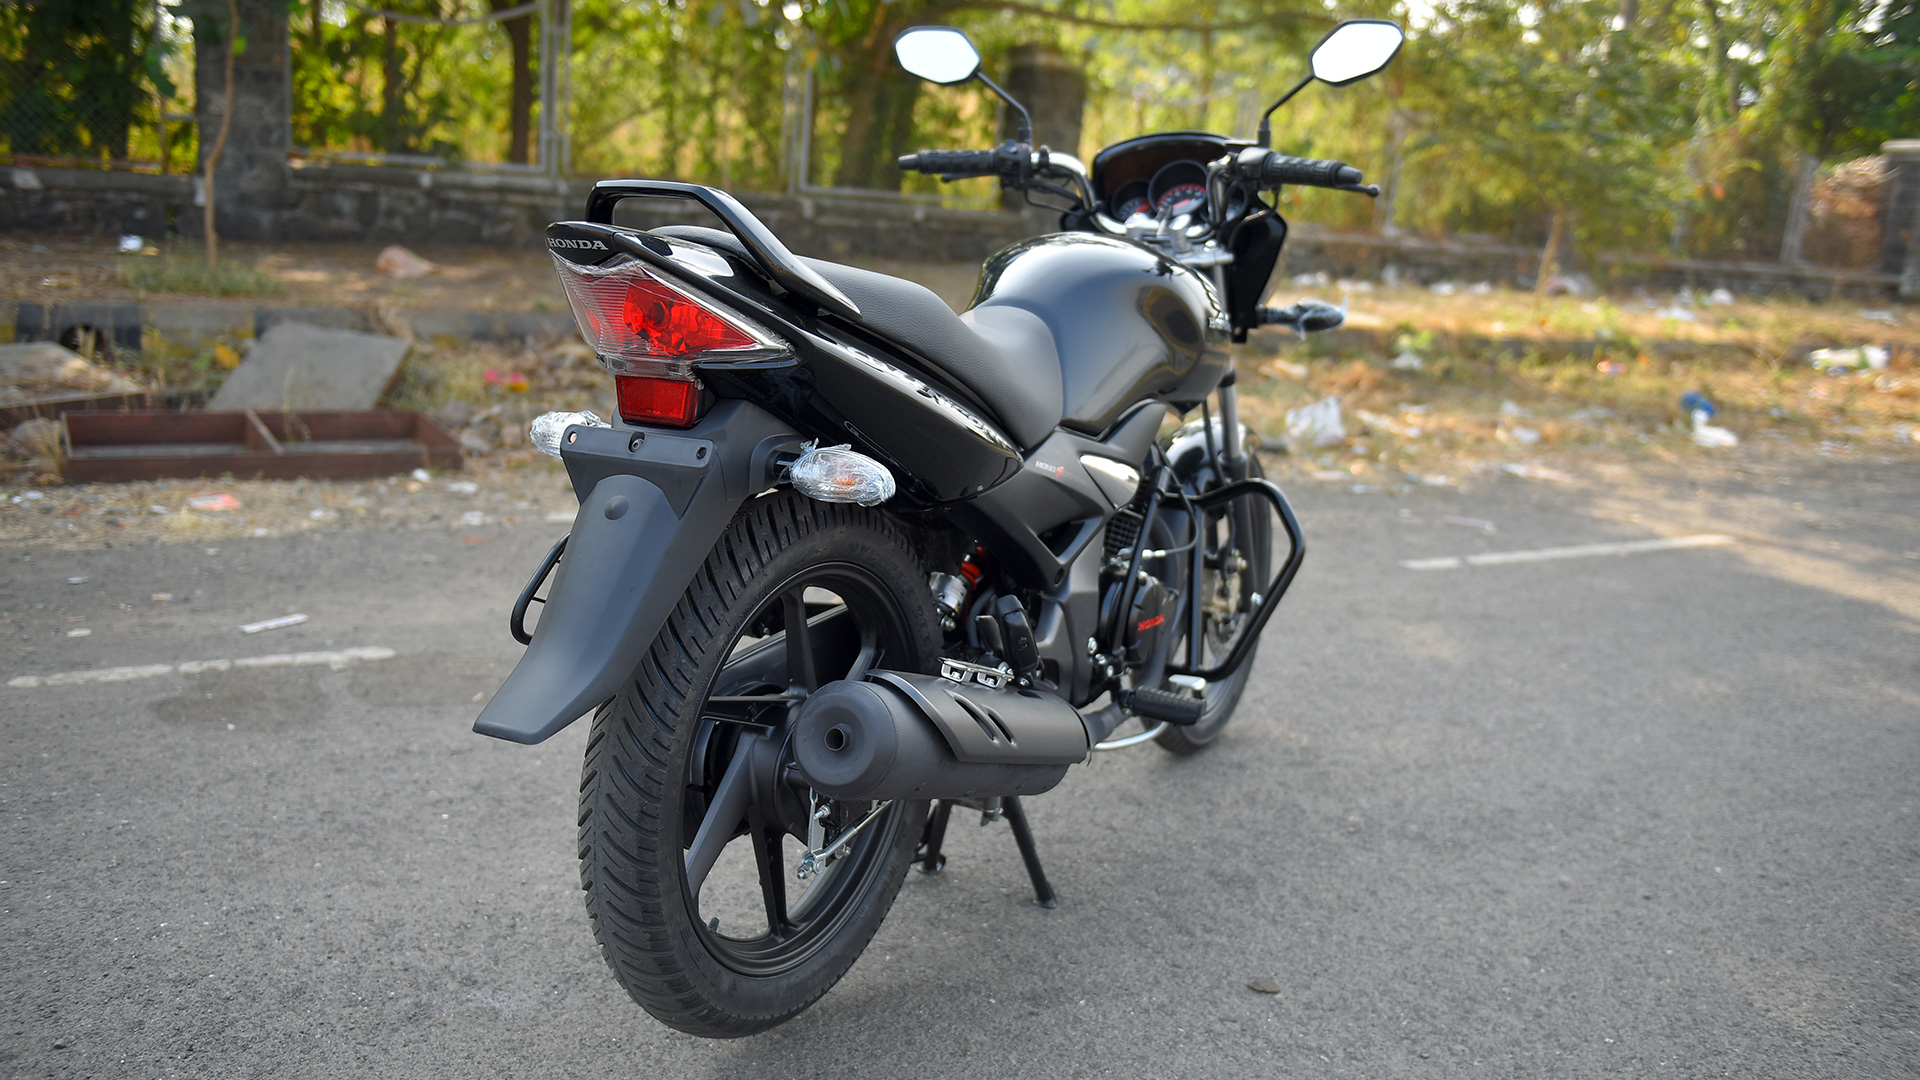 Honda Cb Unicorn 150 2019 Abs Price Mileage Reviews Specification Gallery Overdrive